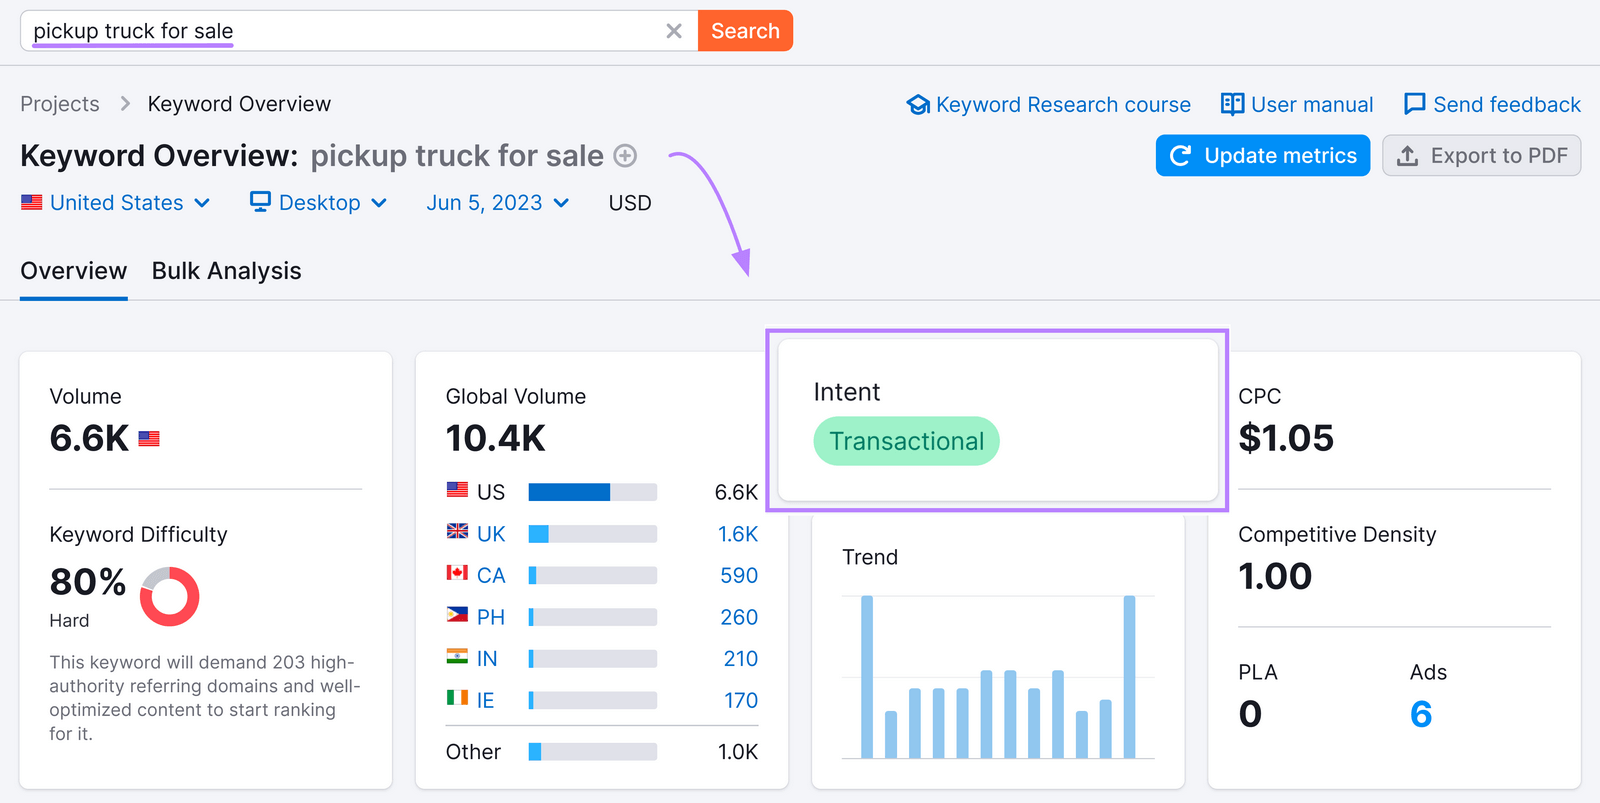 "pickup truck for sale" keyword showing transactional intent in Keyword Overview tool